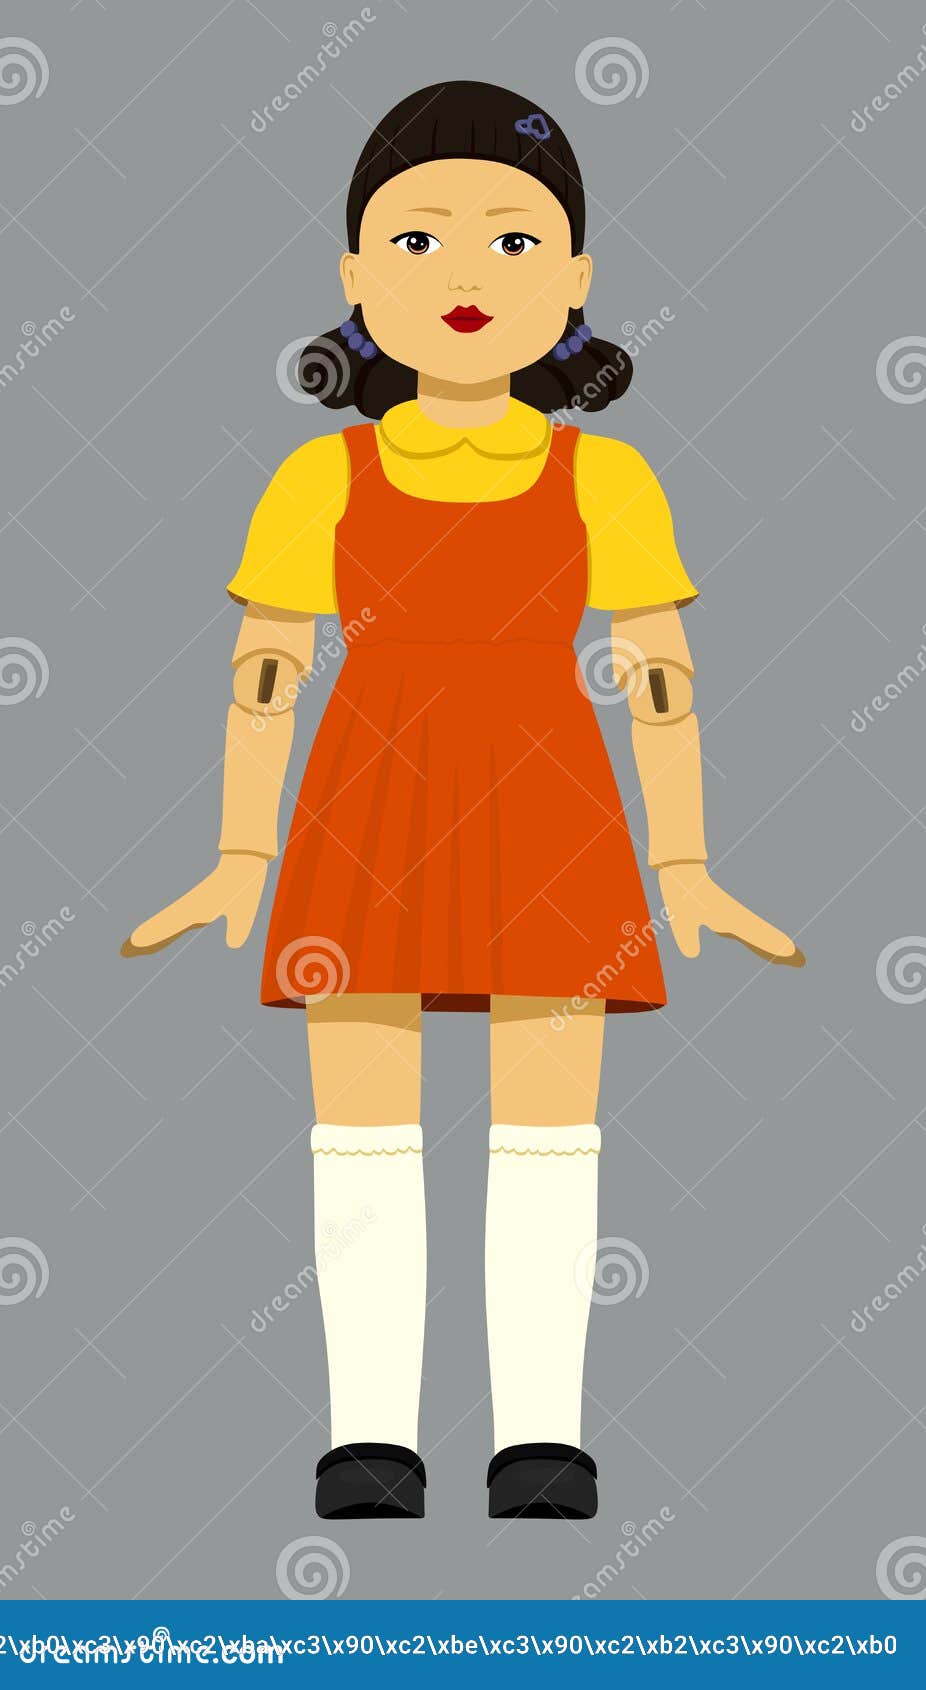 Squid Game. a Creepy Girl Doll. Vector Stock Vector - Illustration of game,  design: 233088638